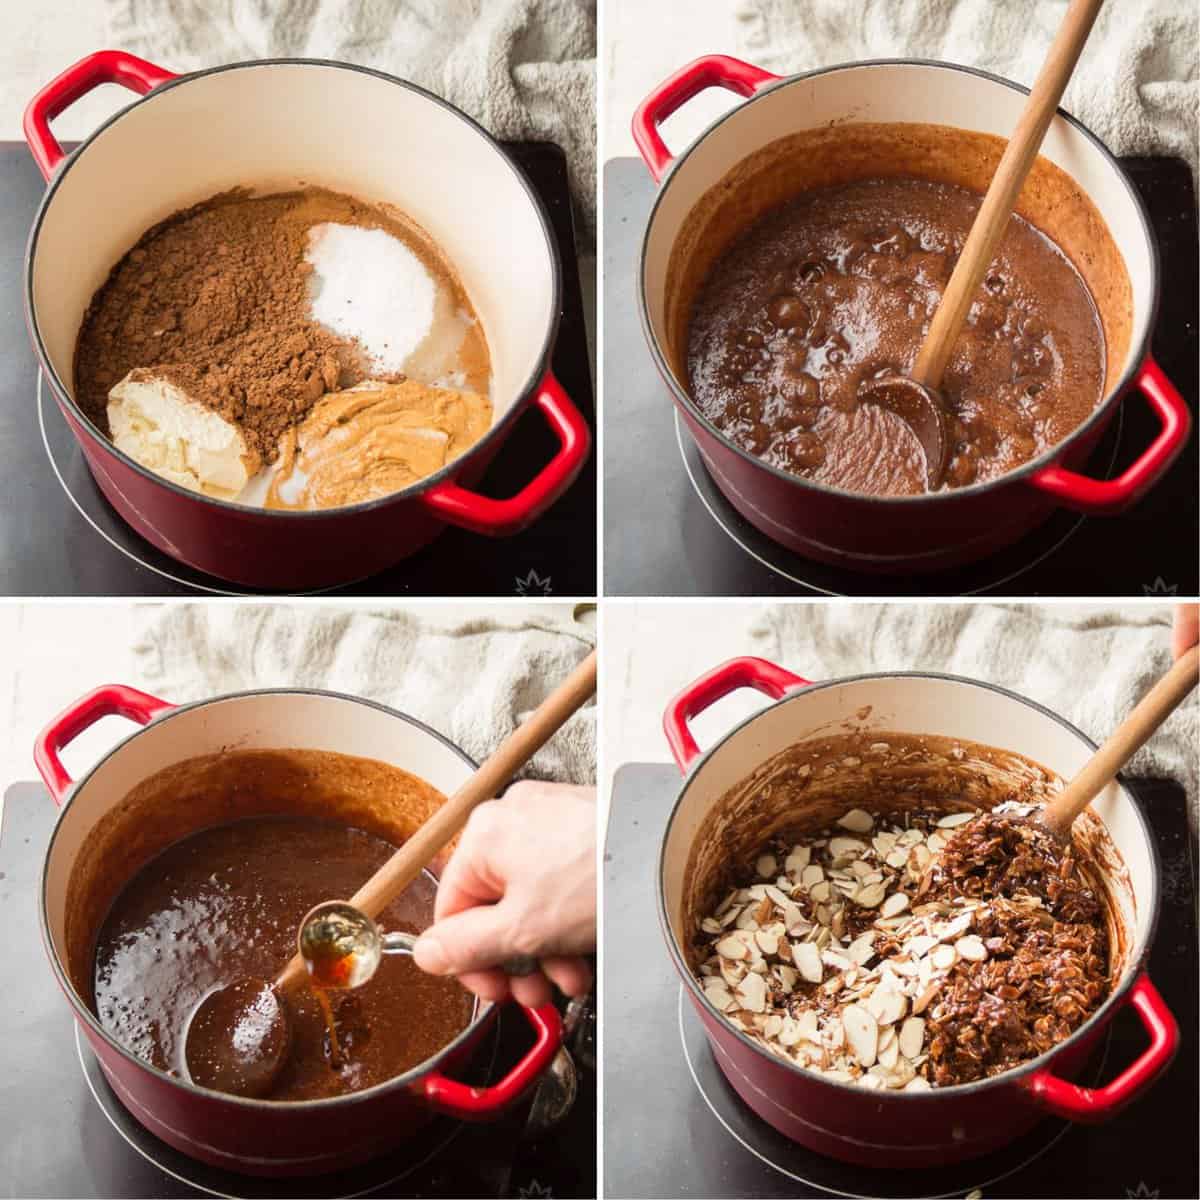 Collage showing steps for making Vegan No Bake Cookie dough.